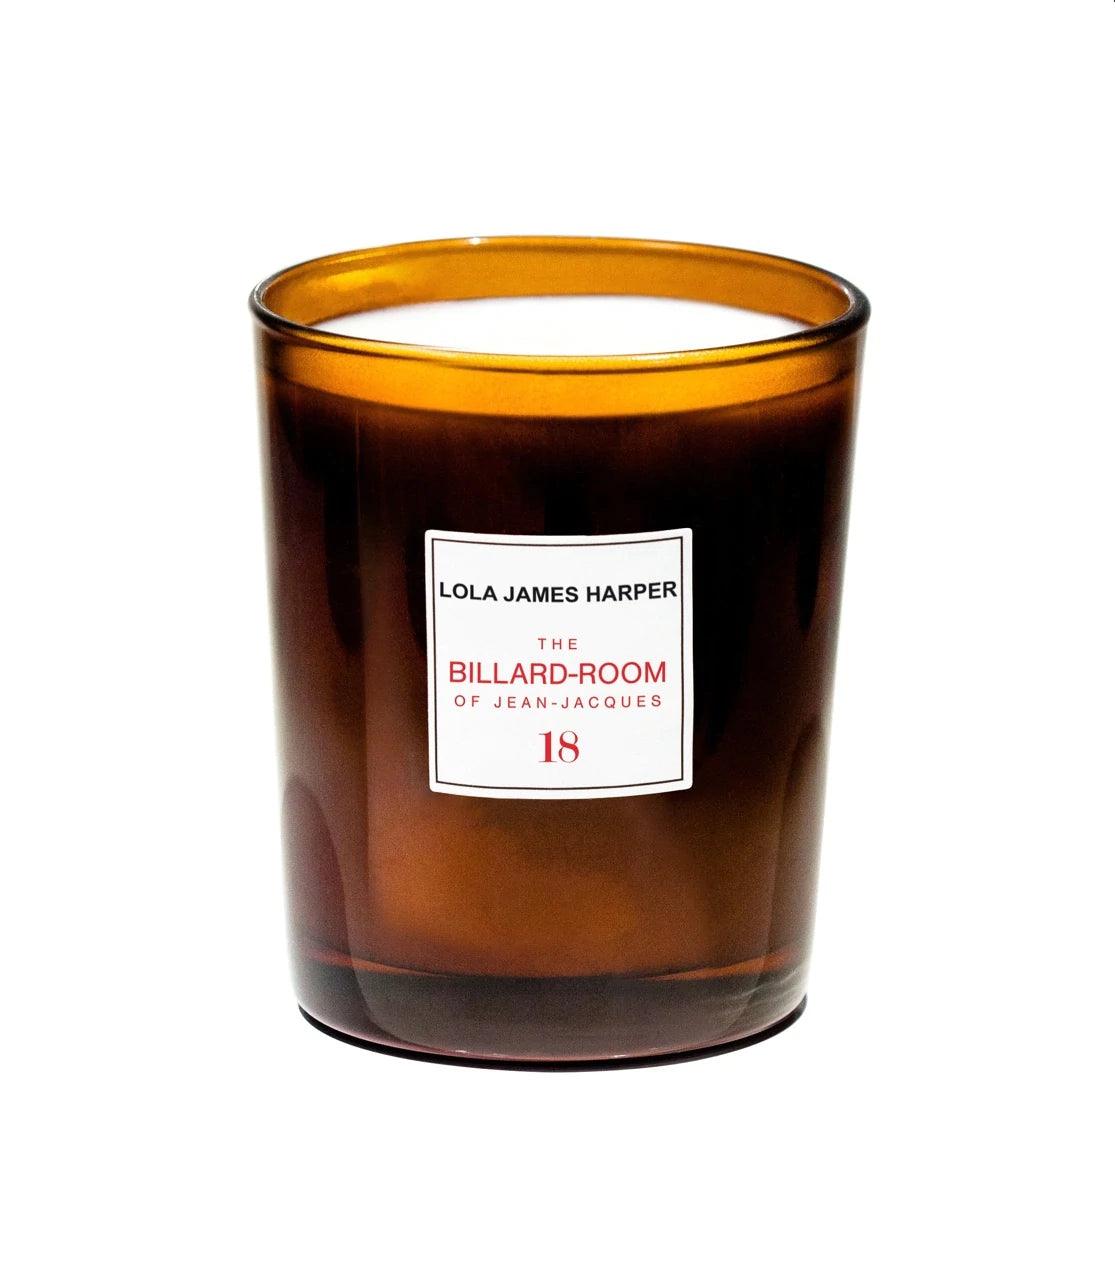 The Billard-Room of Jacques Candle by Lola James Harper - Haven